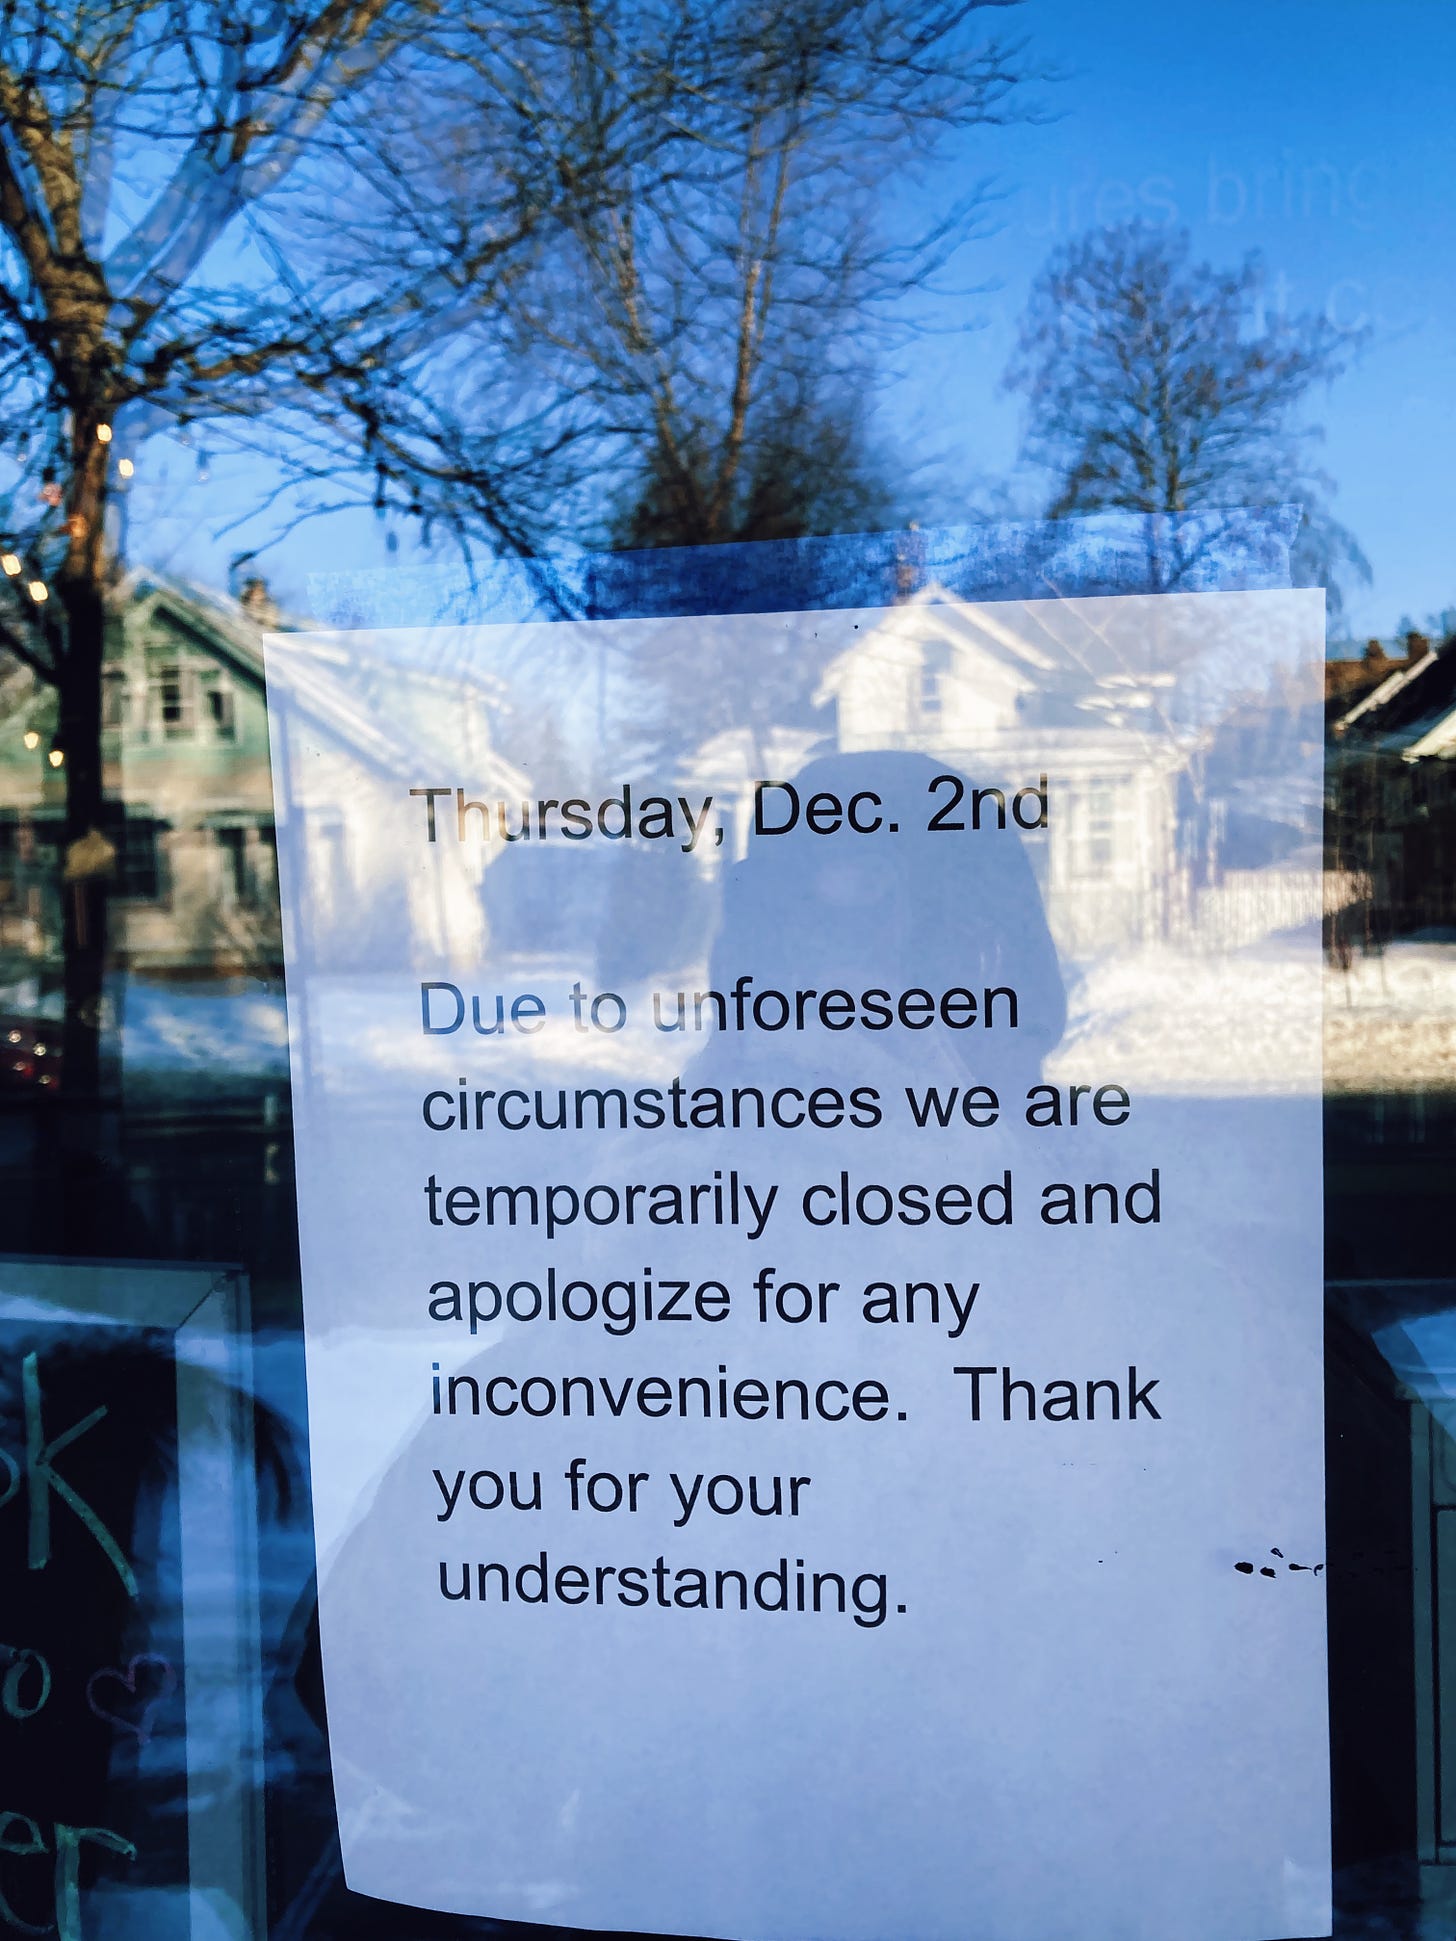 a paper sign on a glass door reads "“Thursday, Dec. 2nd. Due to unforeseen circumstances we are temporarily closed and apologize for any inconvenience. Thank you for your understanding.”